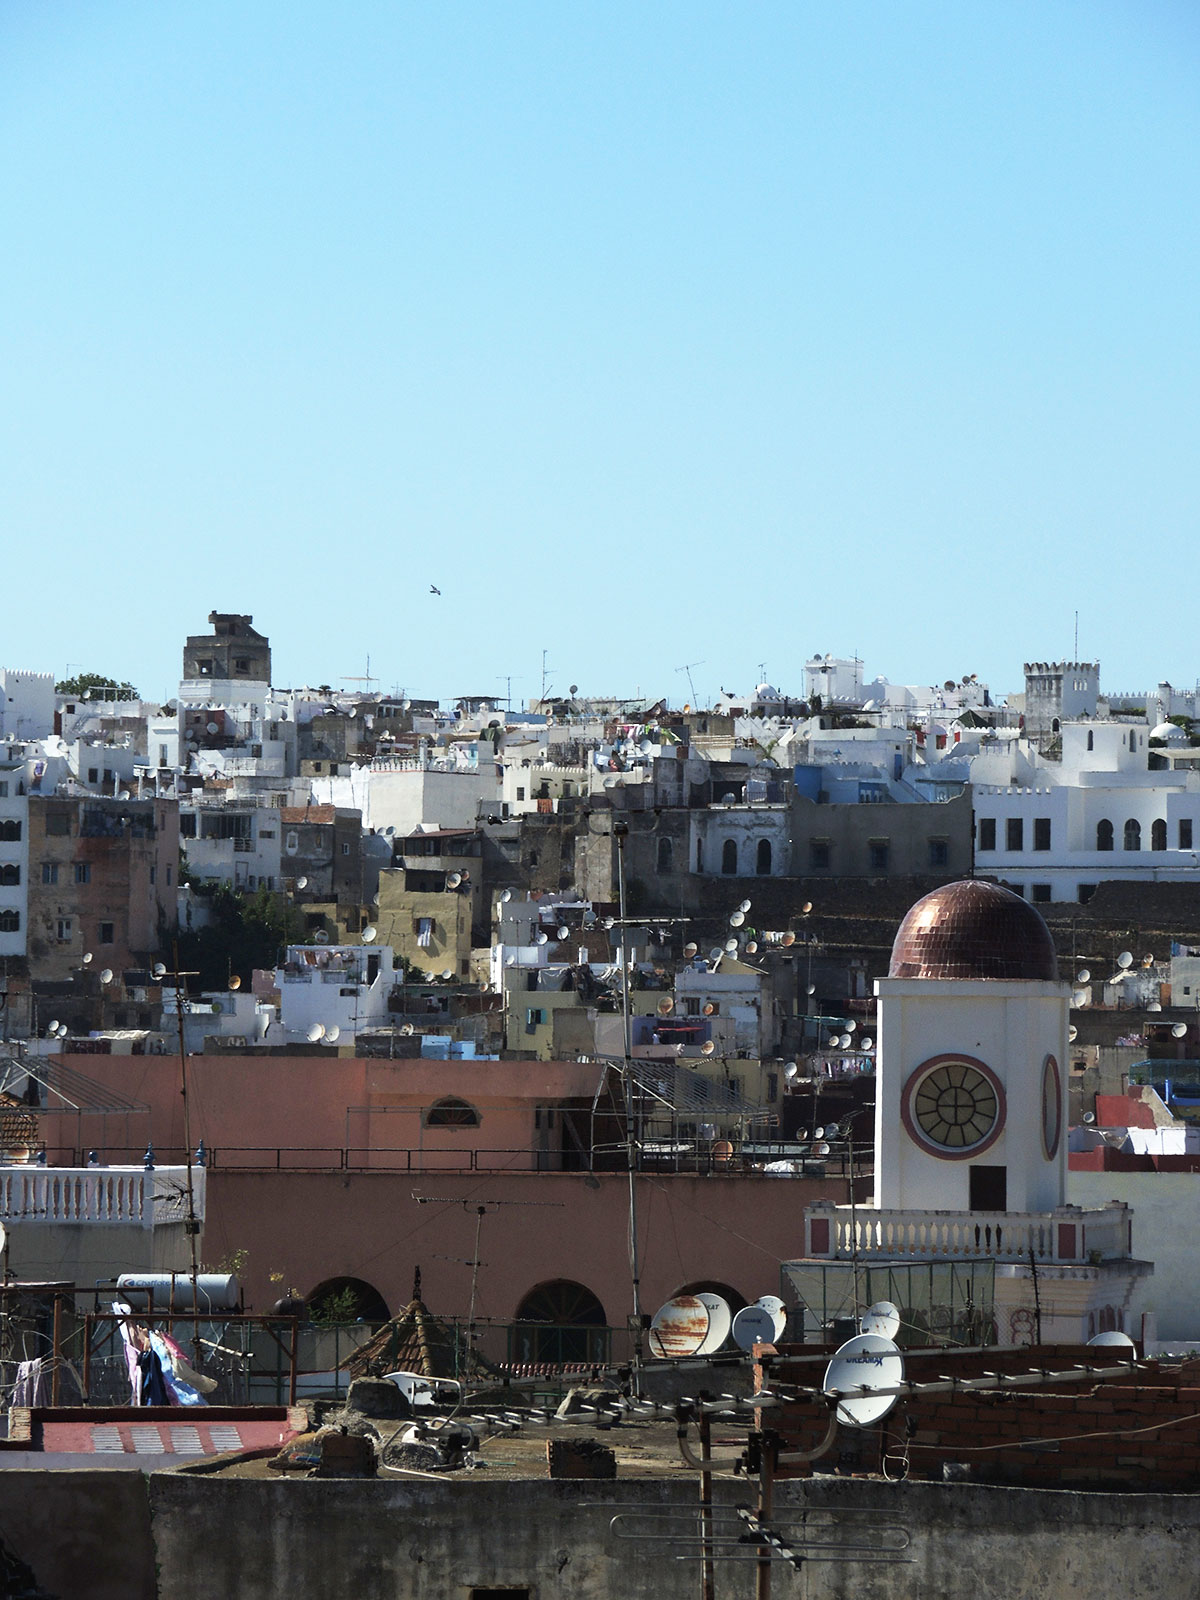 View from the terrace on the 3rd floor looking toward the Qasba.  Visible in the foreground, lower right is the copper dome of the tower on the Church of the Immaculate Conception